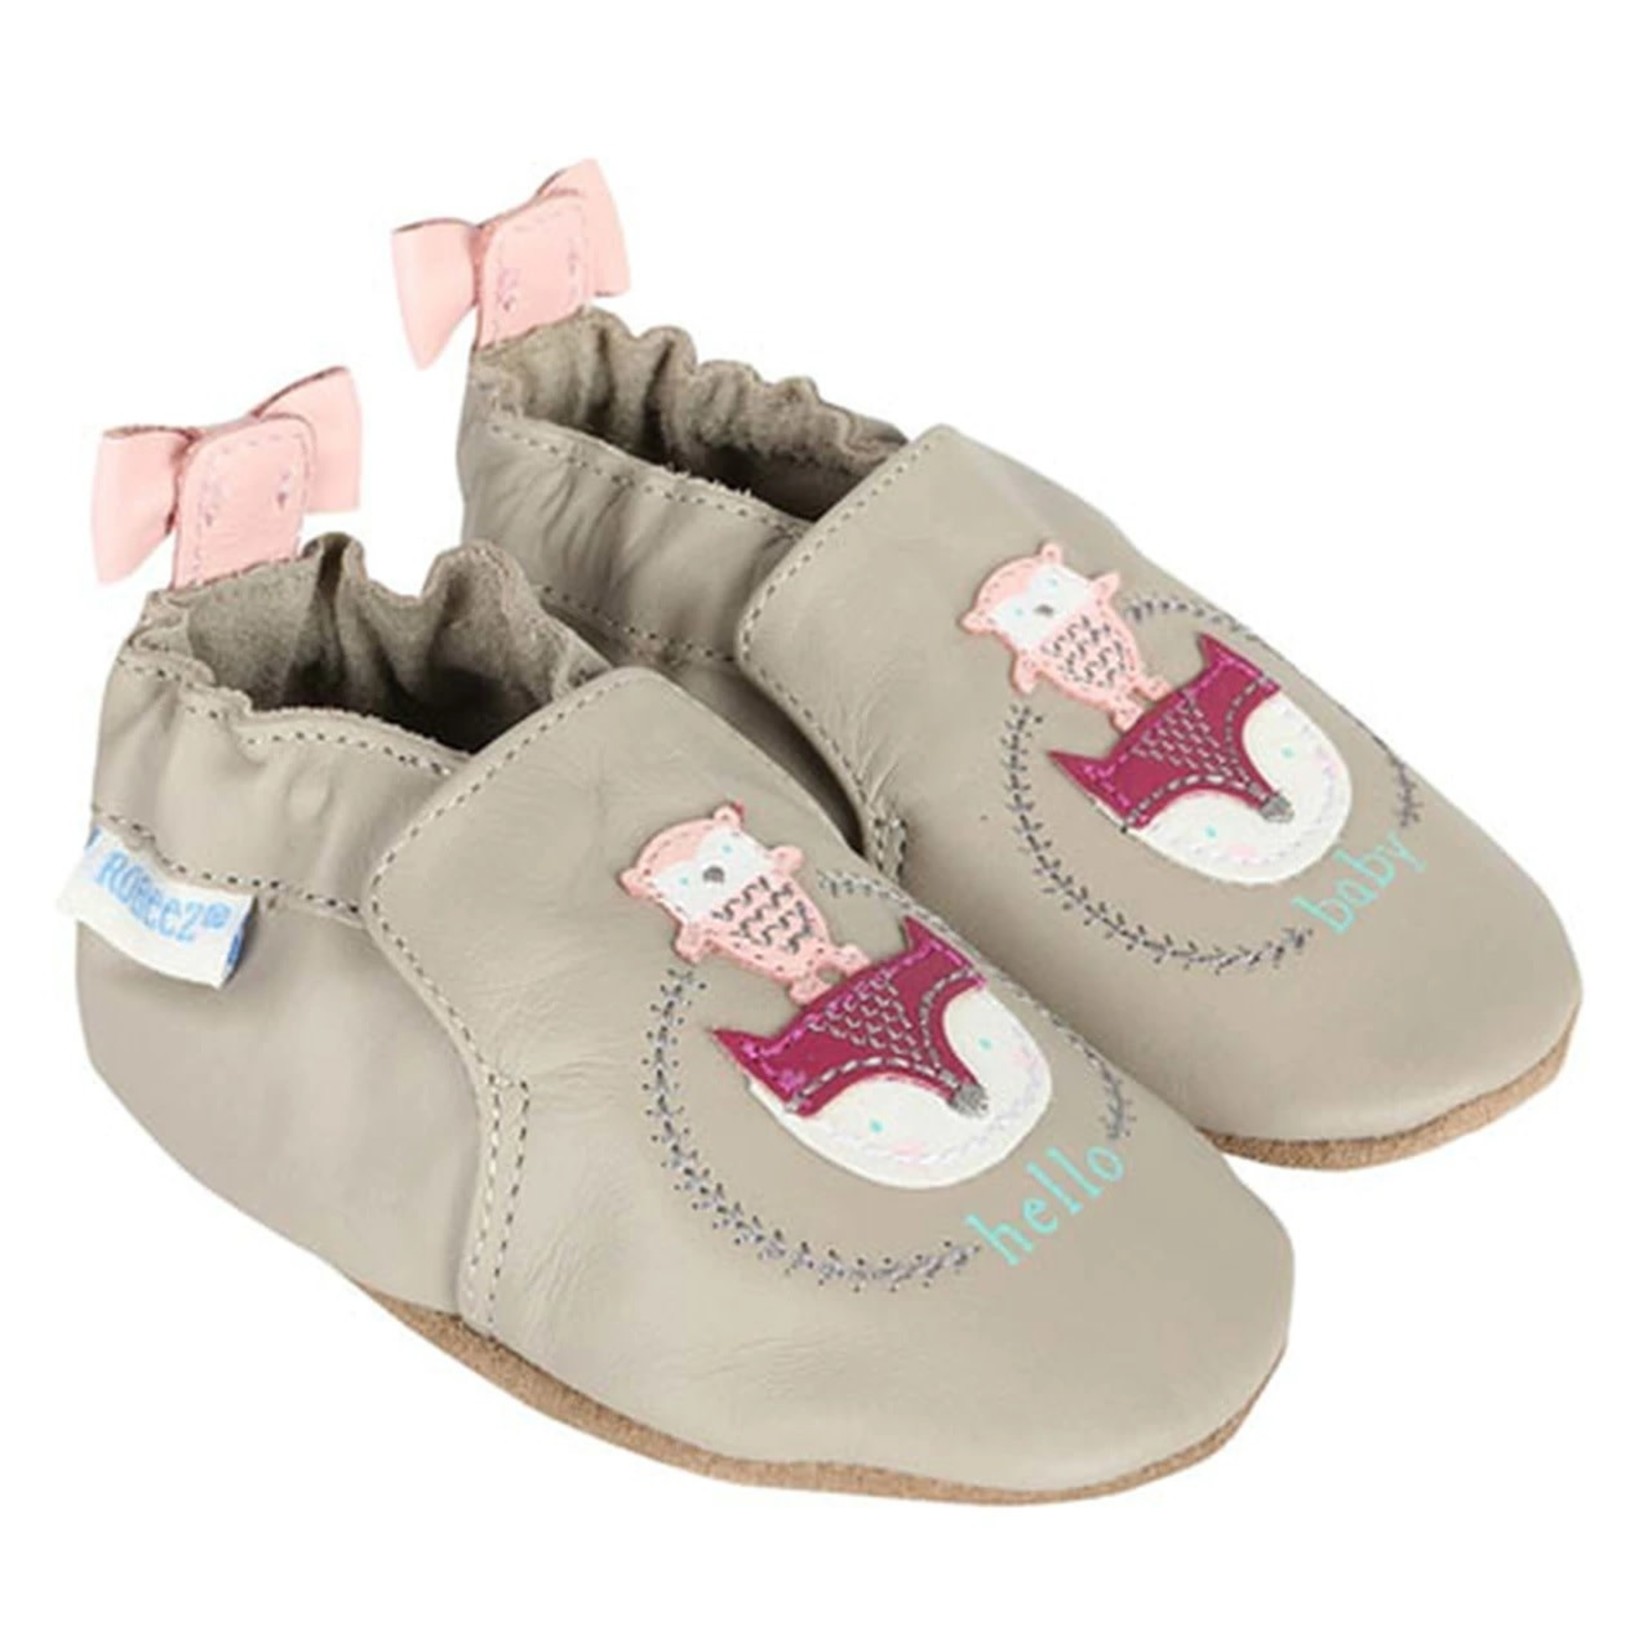 Robeez ROBEEZ - Soft leather slippers 'Hello Baby Friends' - Light Grey